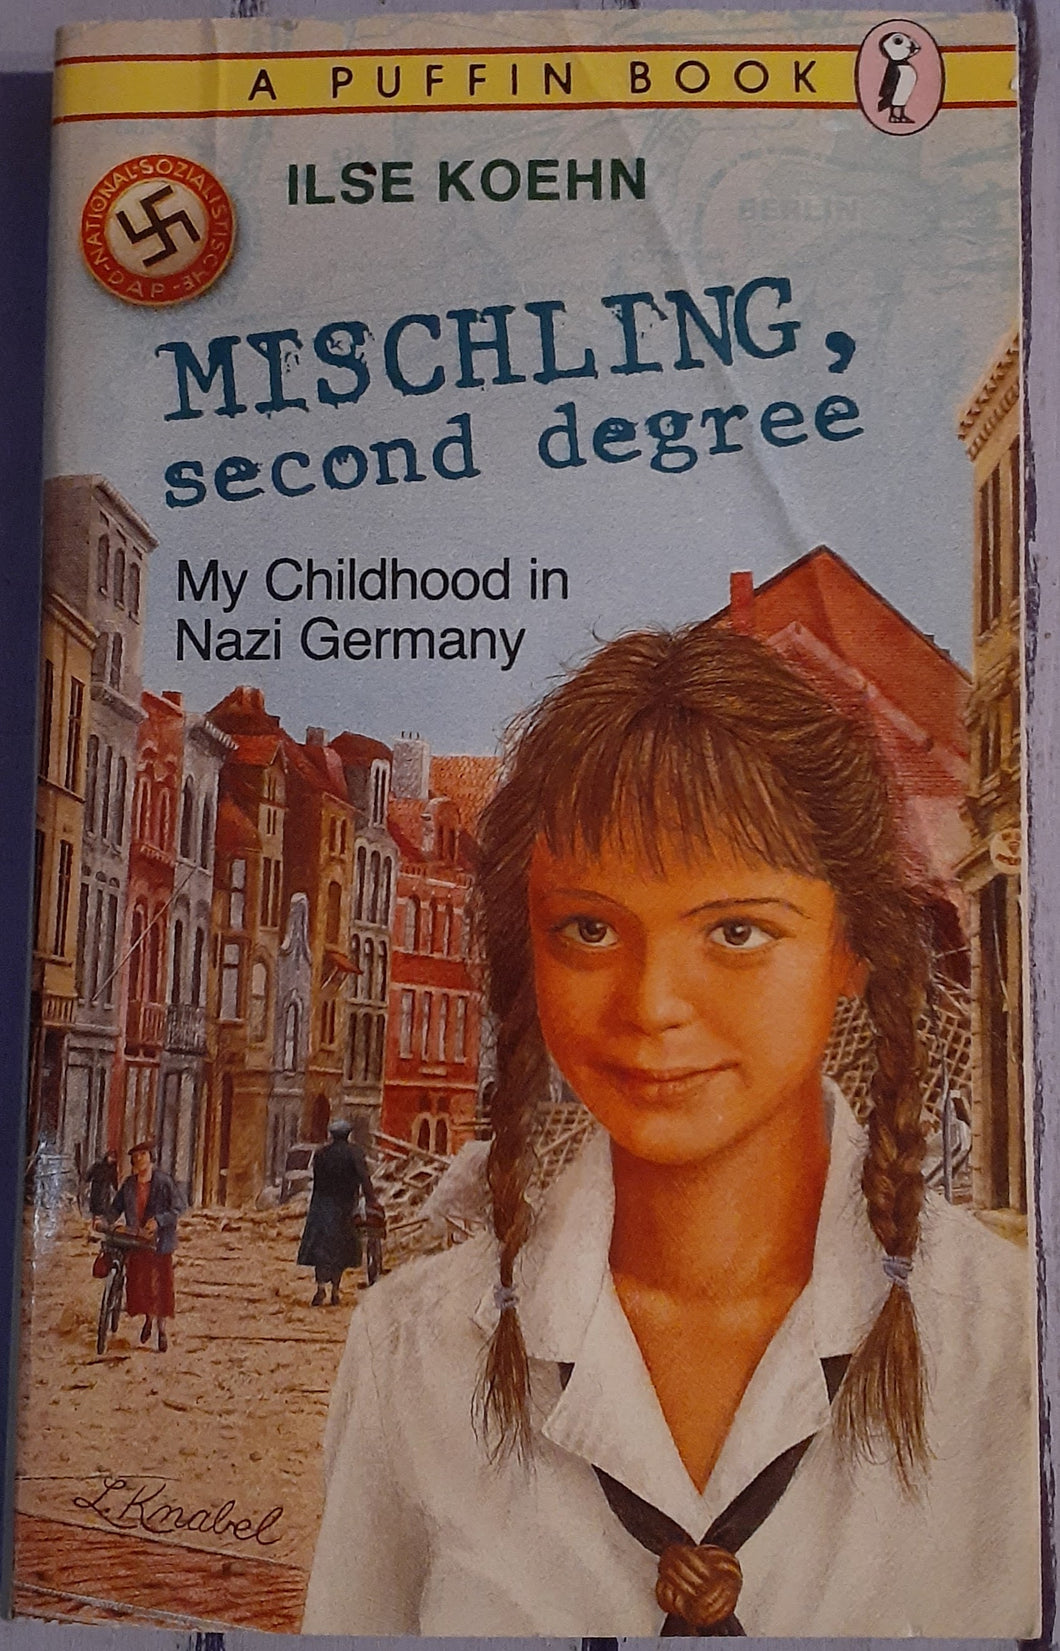 Mischling, Second Degree - My Childhood in Nazi Germany